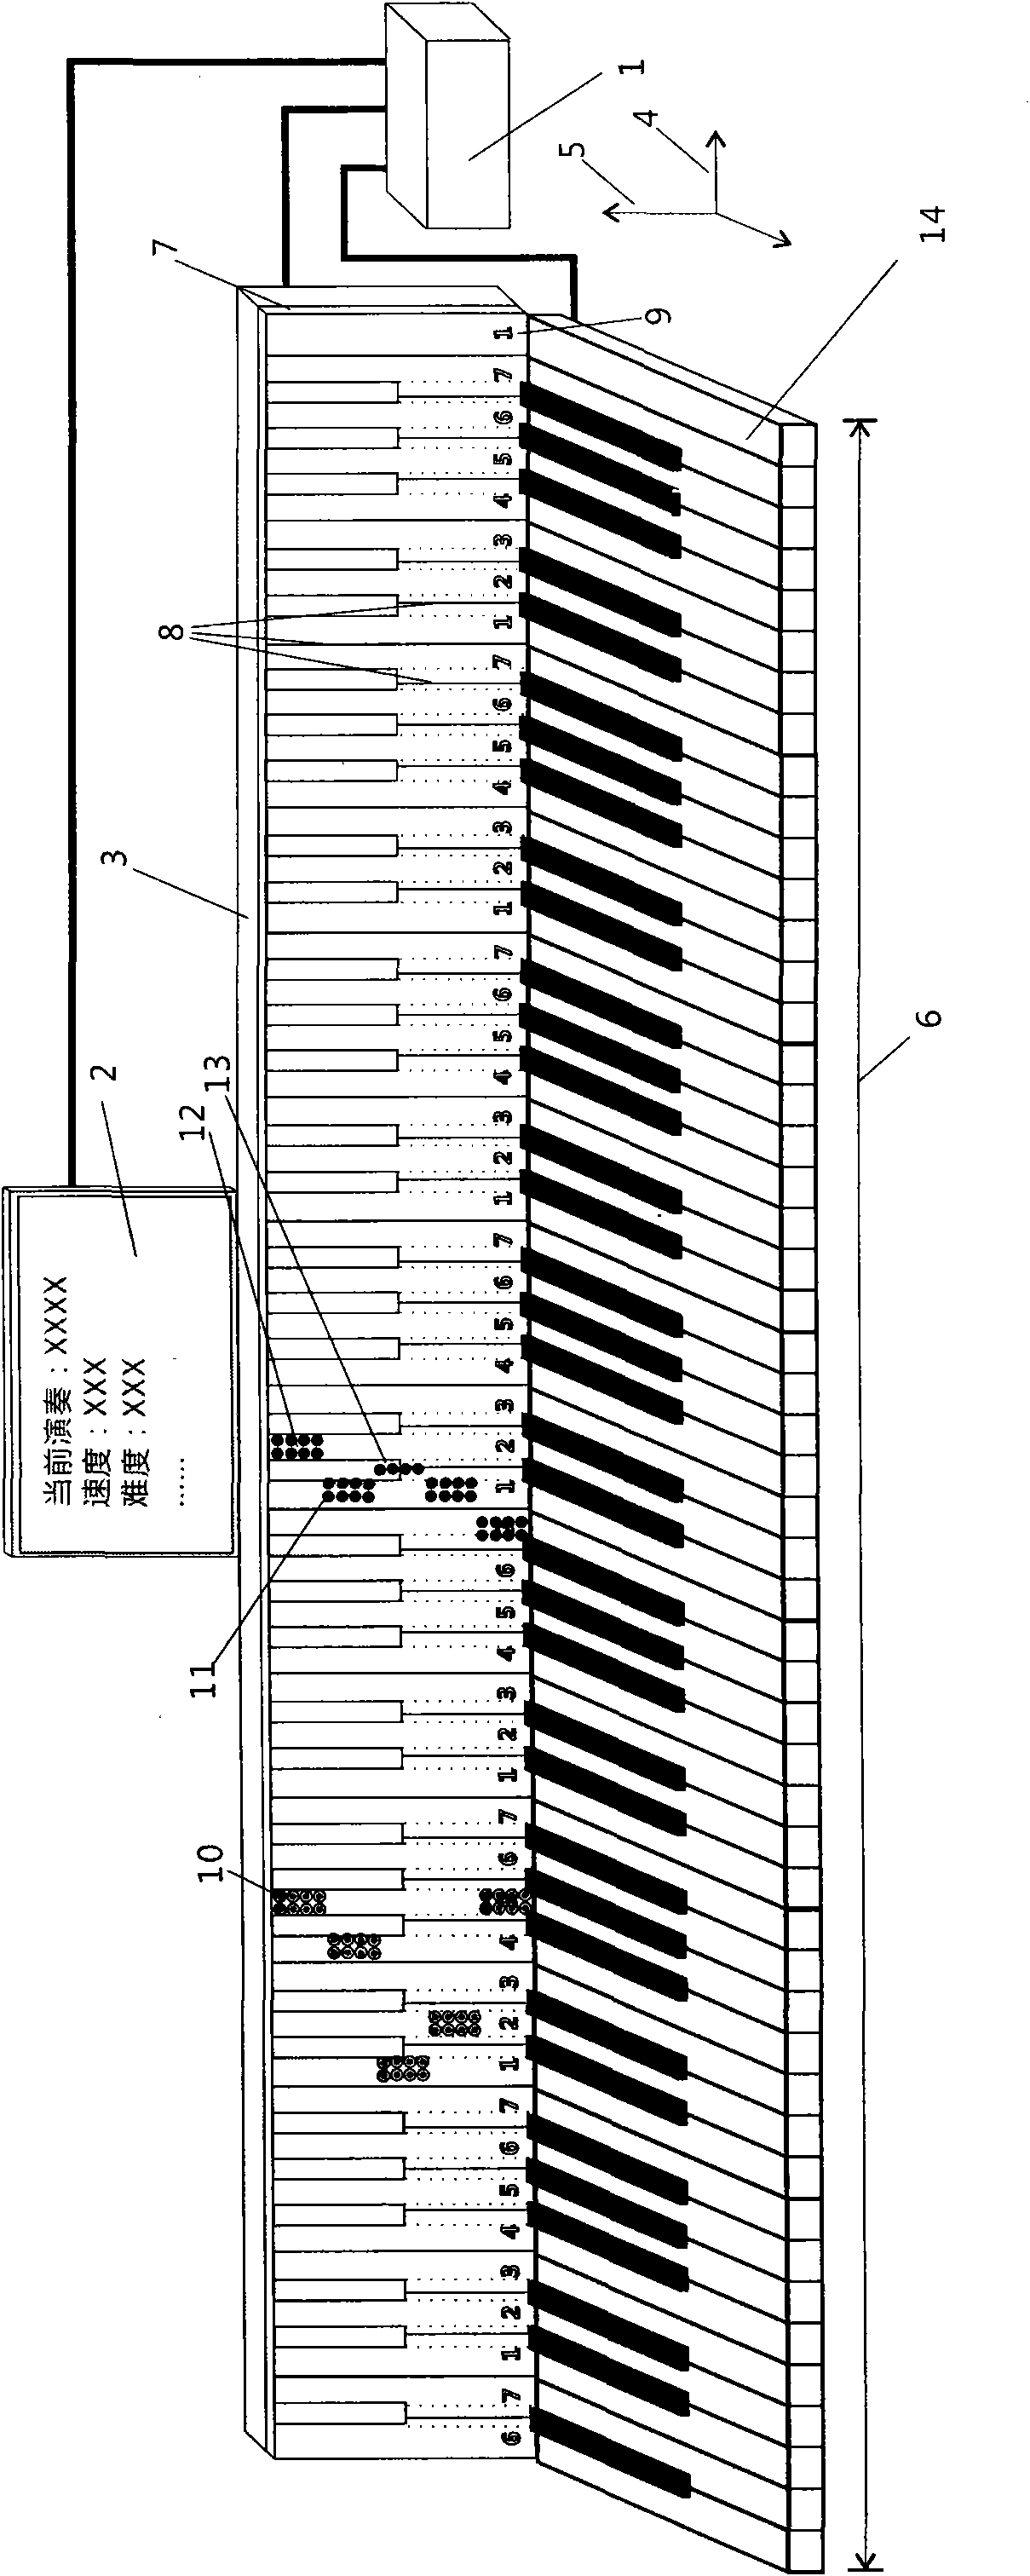 Musical note indicator for keyboard instrument